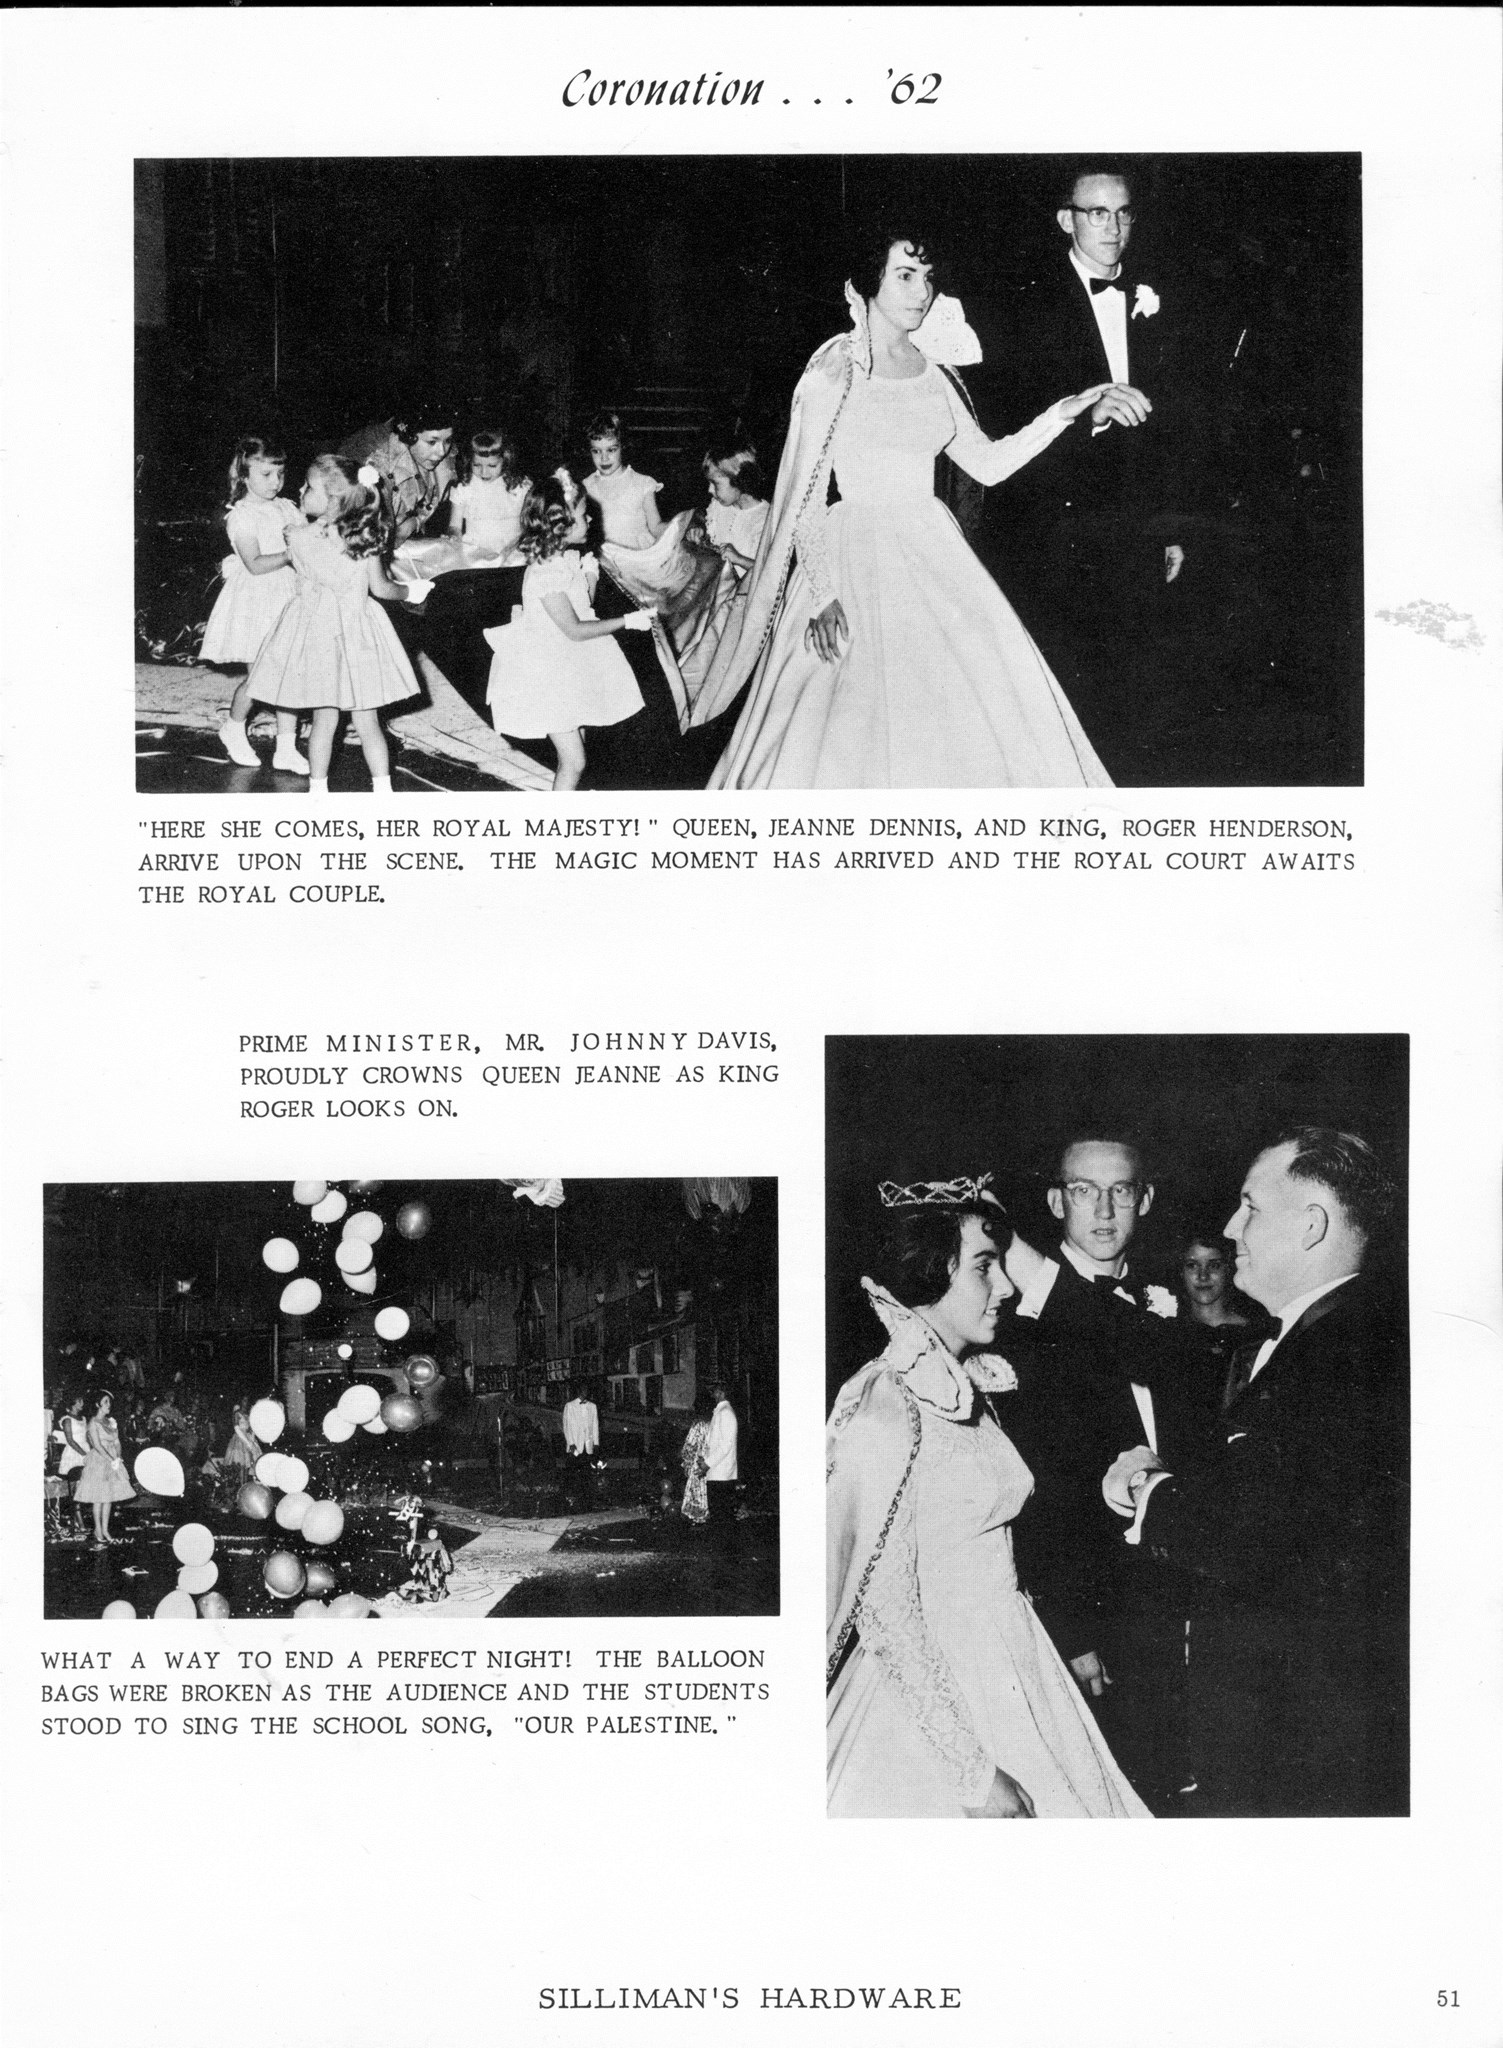 ../../../Images/Large/1962/Arclight-1962-pg0051.jpg